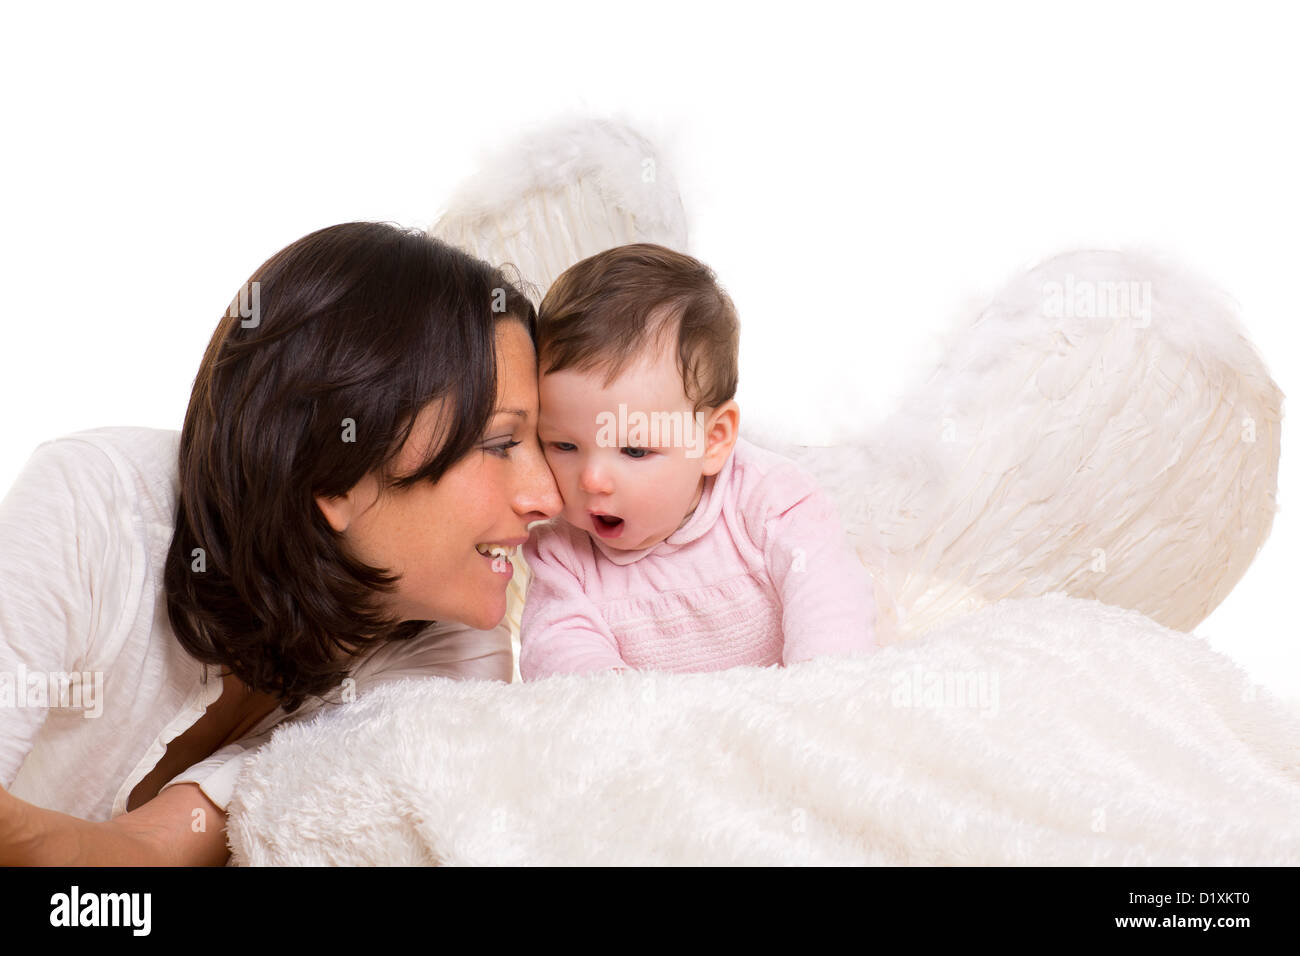 baby girl angel with feather white wings and mother on white fur Stock Photo